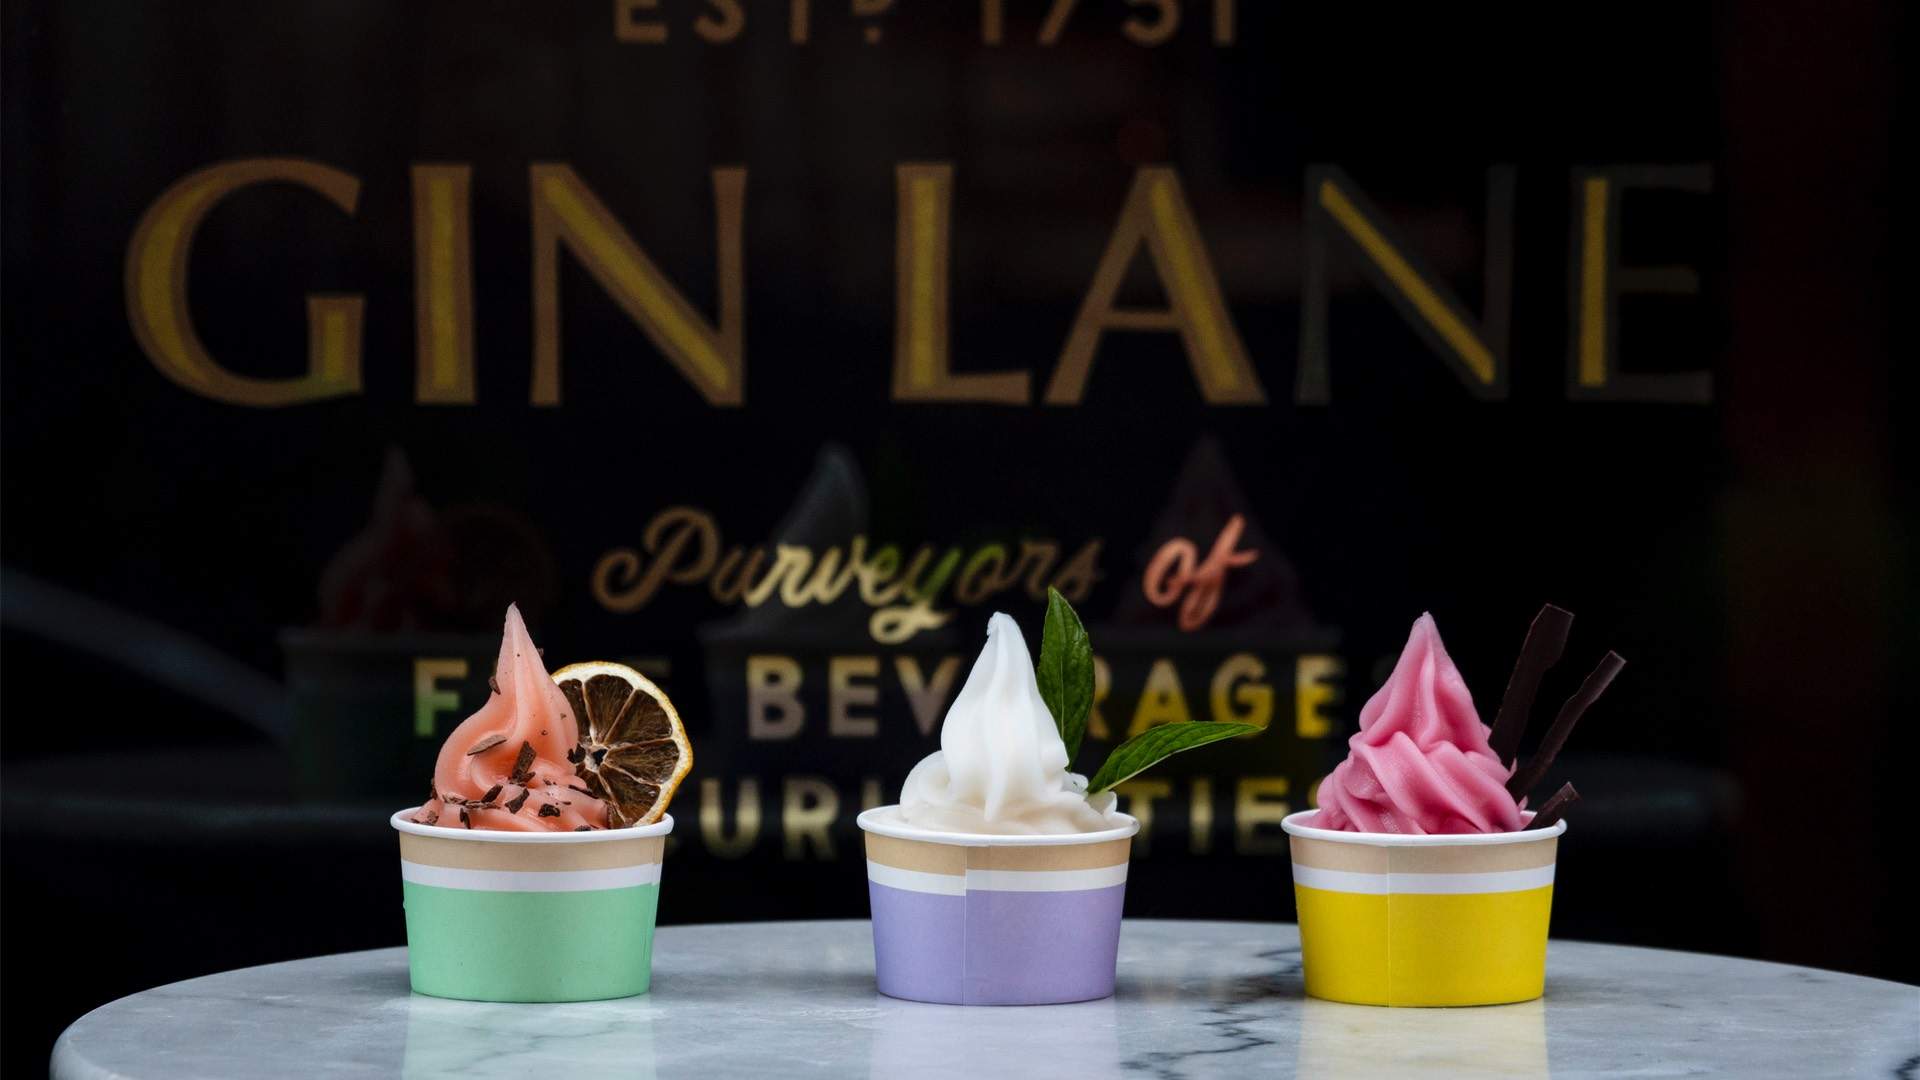 Chippendale's Gin Lane Has Launched a New Range of Gin-Infused Soft Serve for Summer